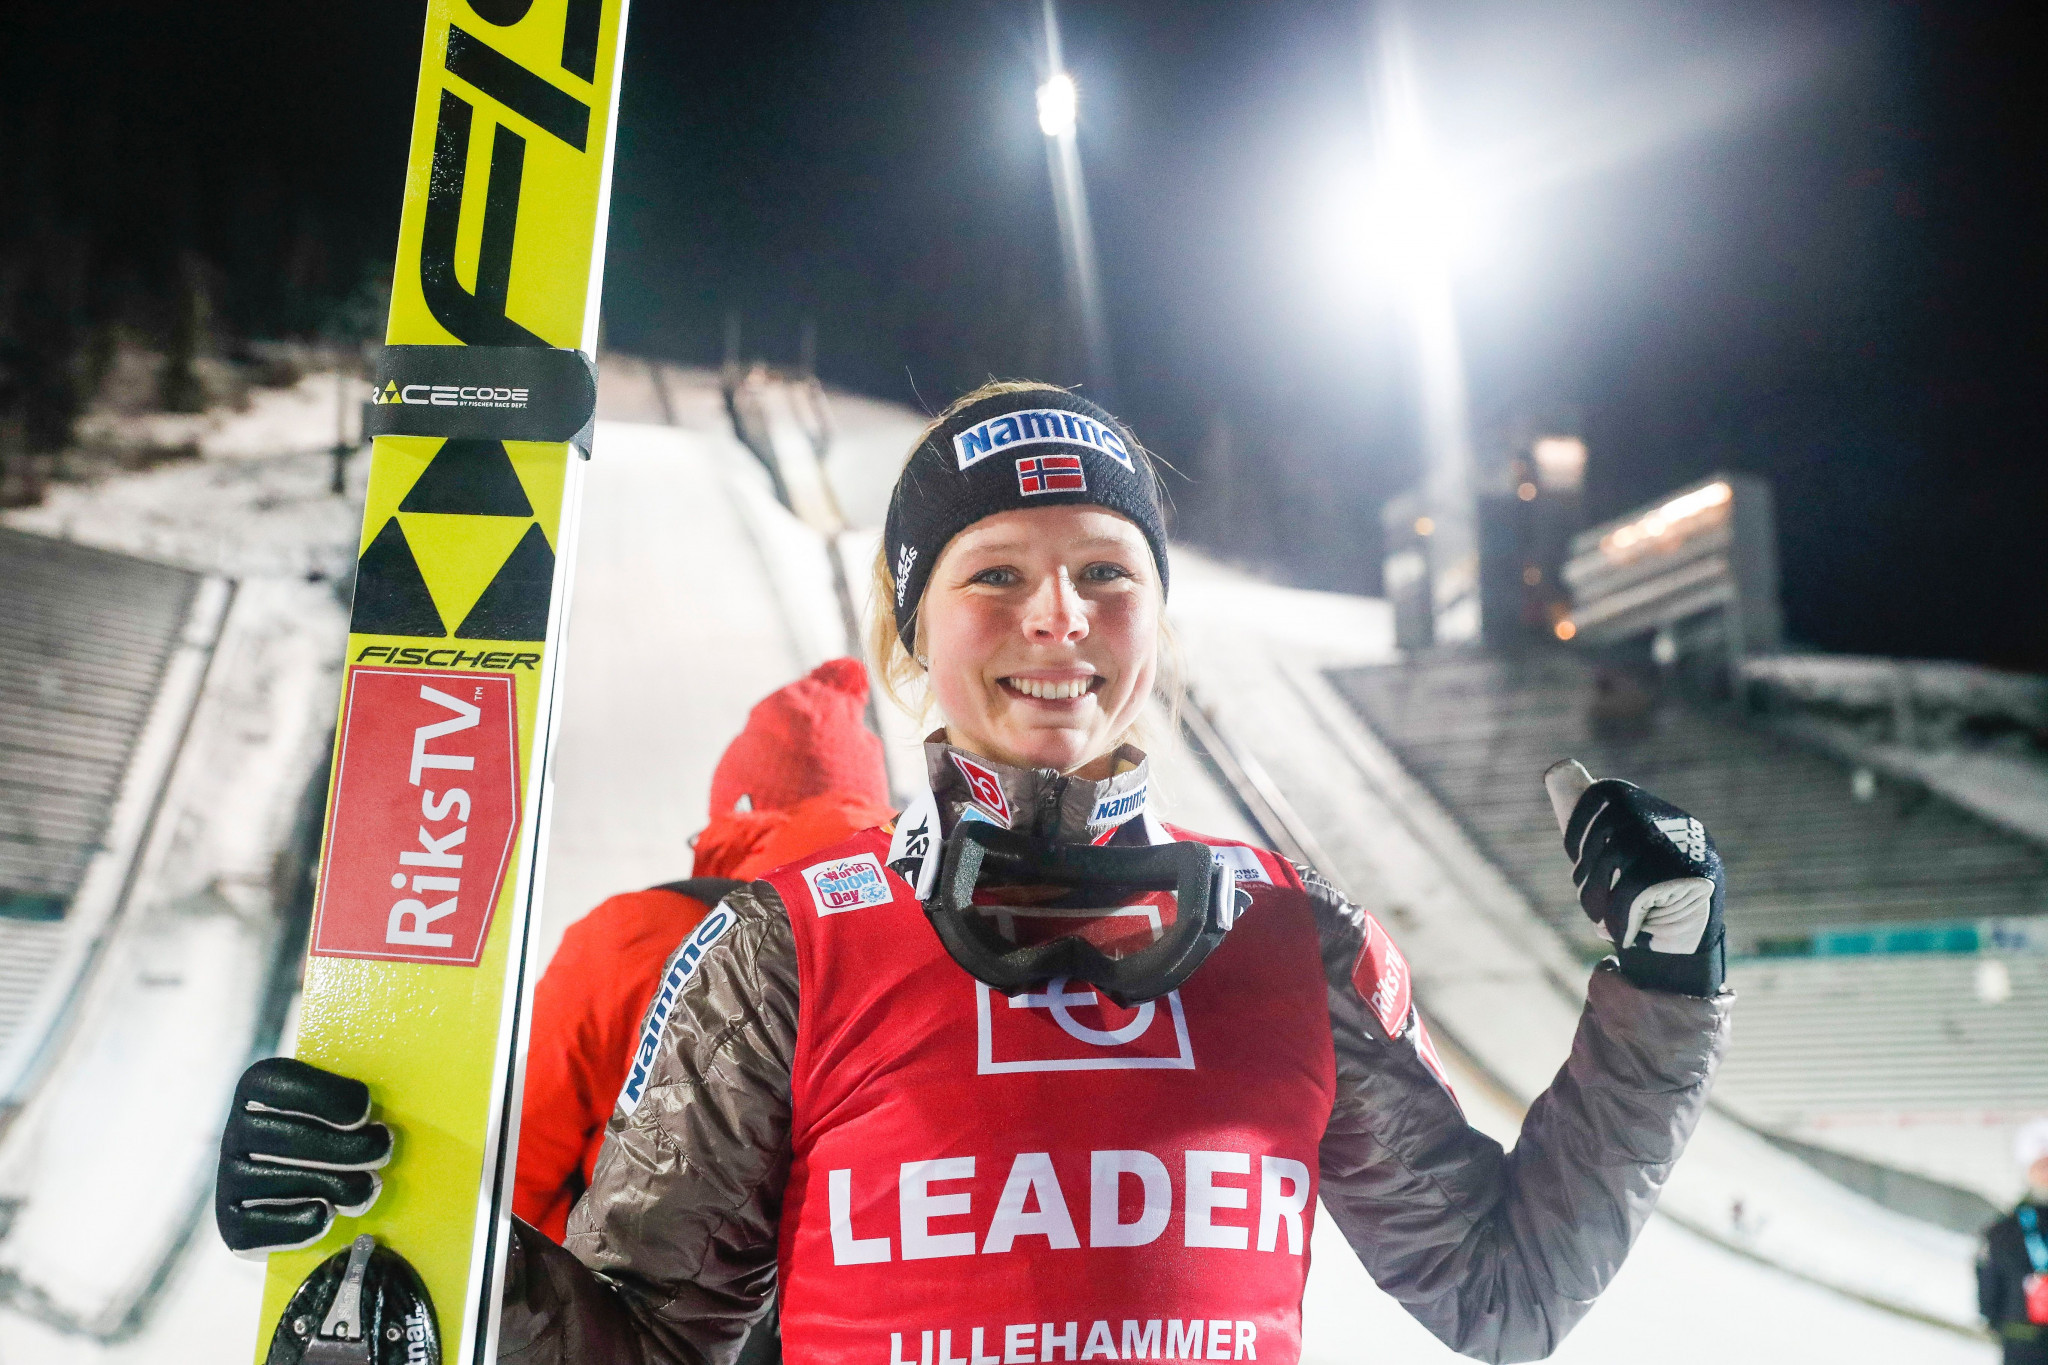 Home win for Lundby as FIS Women's Ski Jumping World Cup season begins